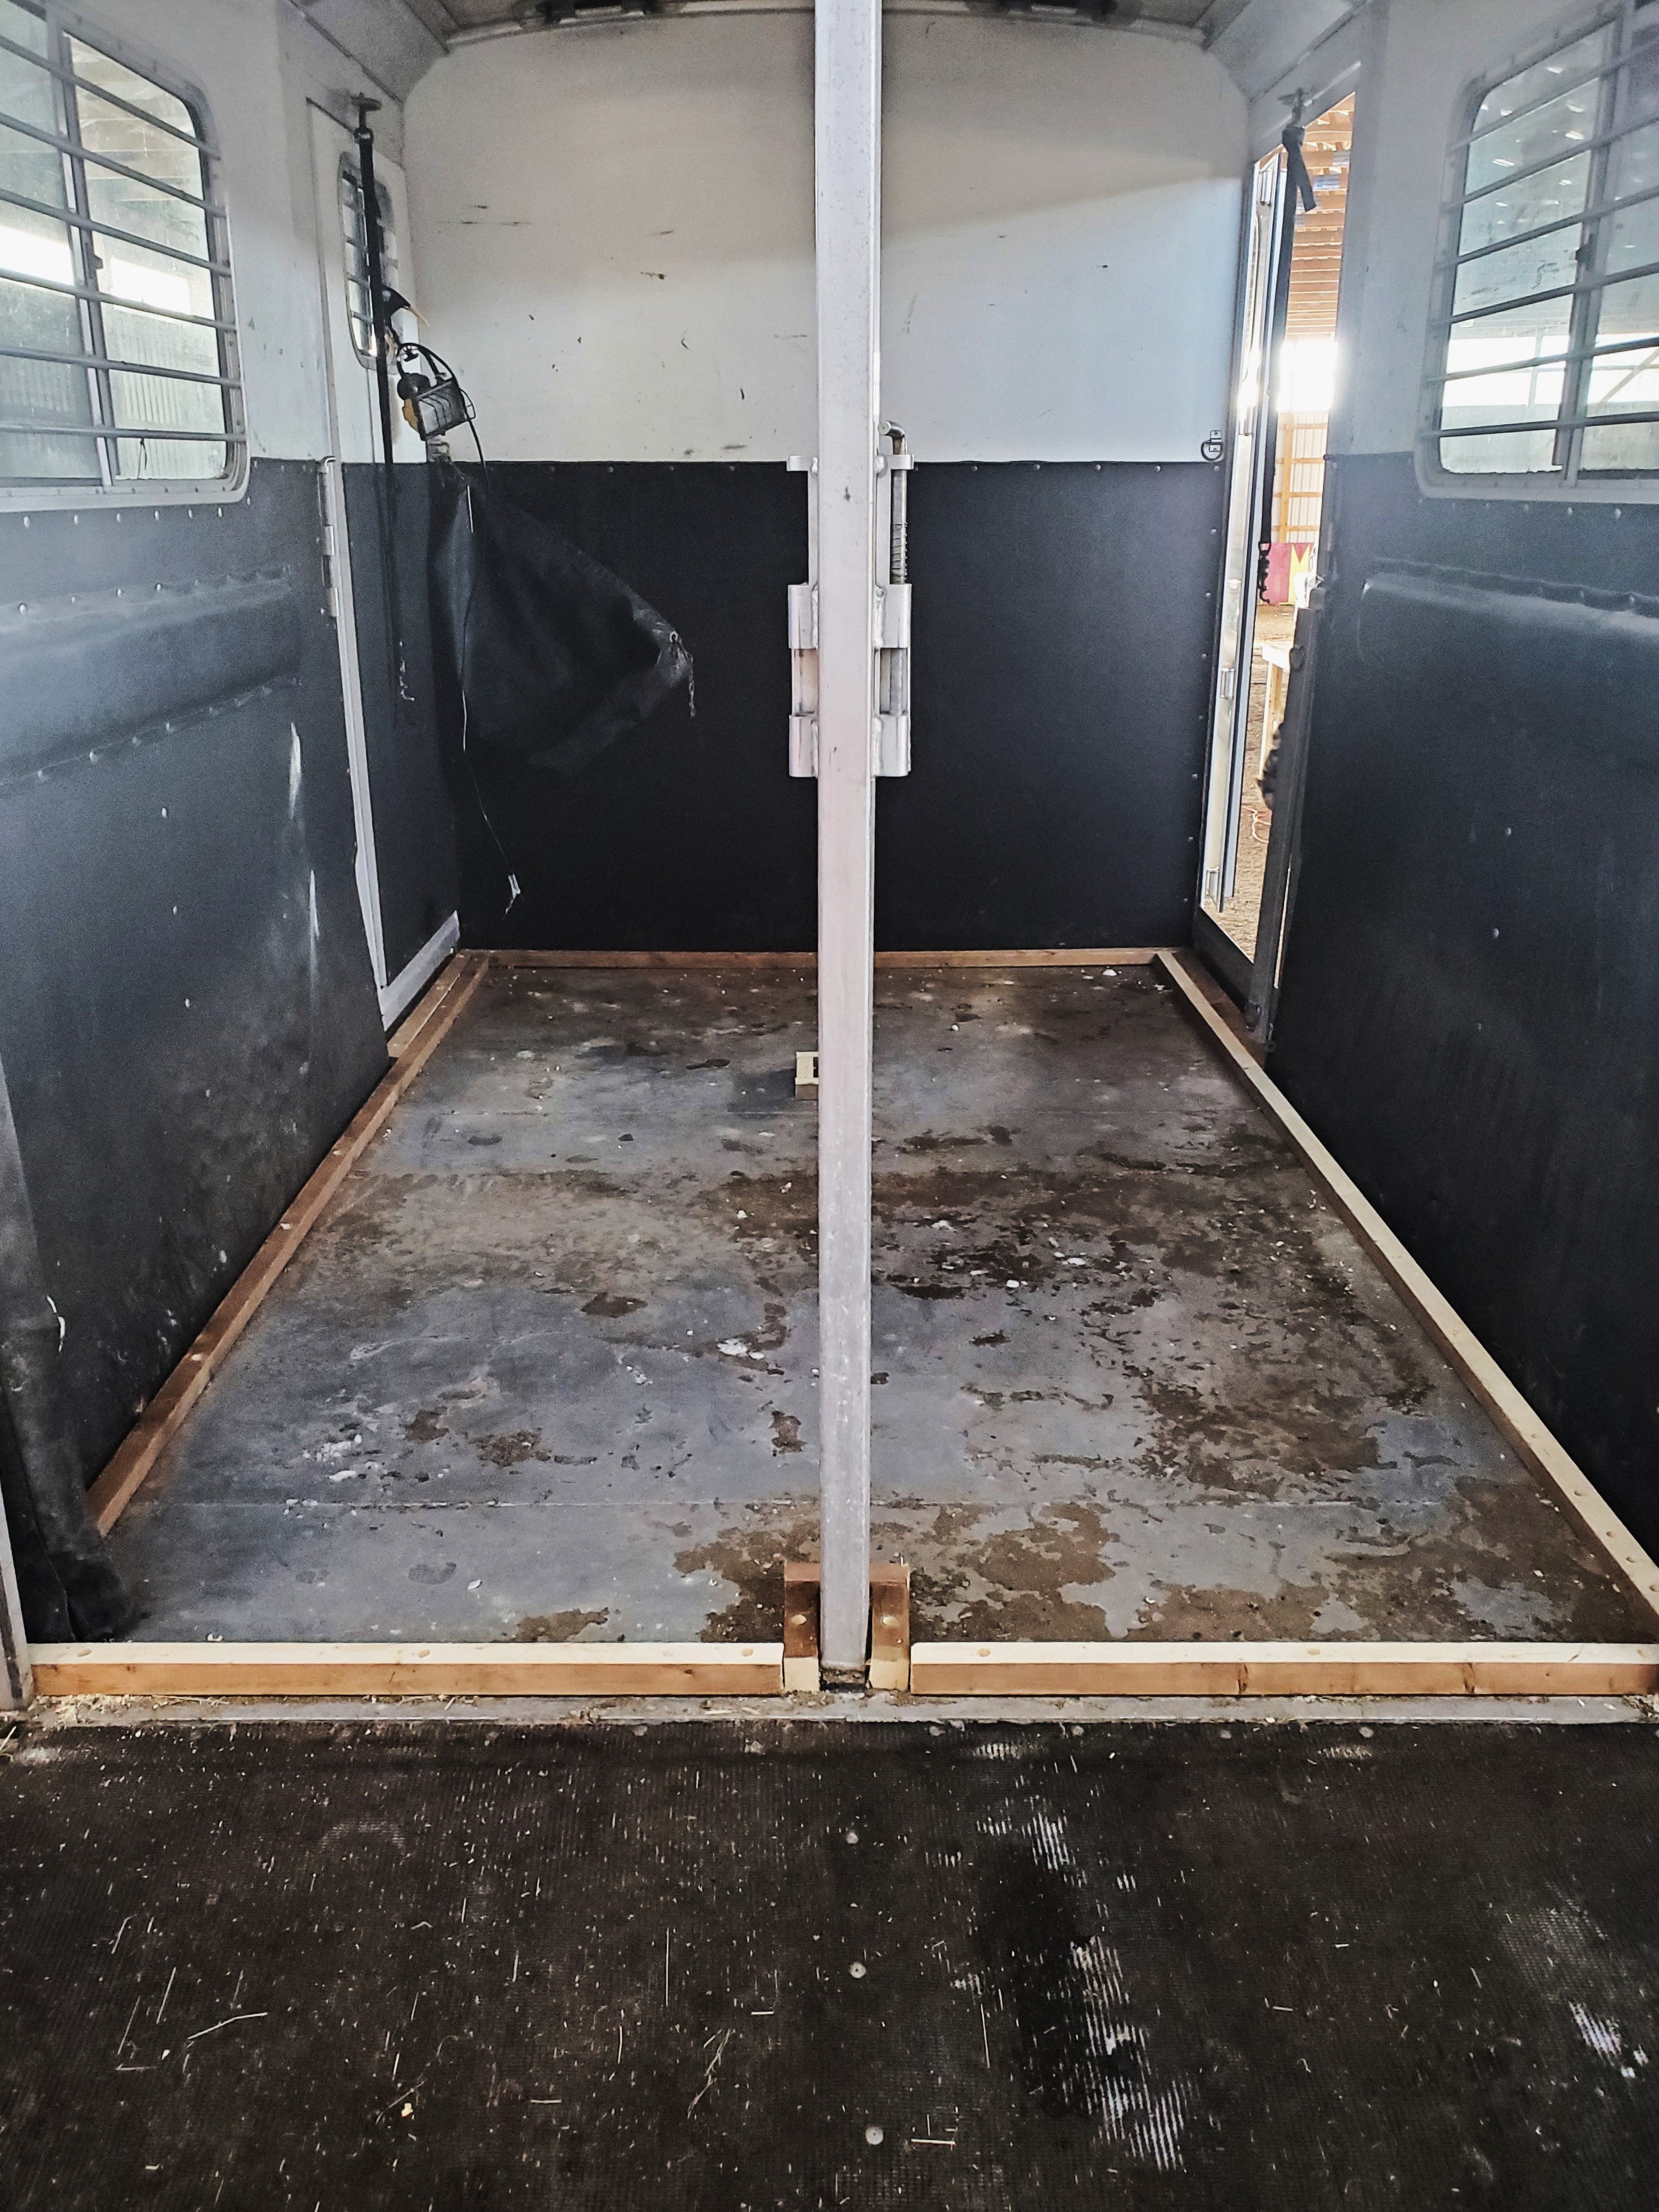 A stripped horse trailer with no padding